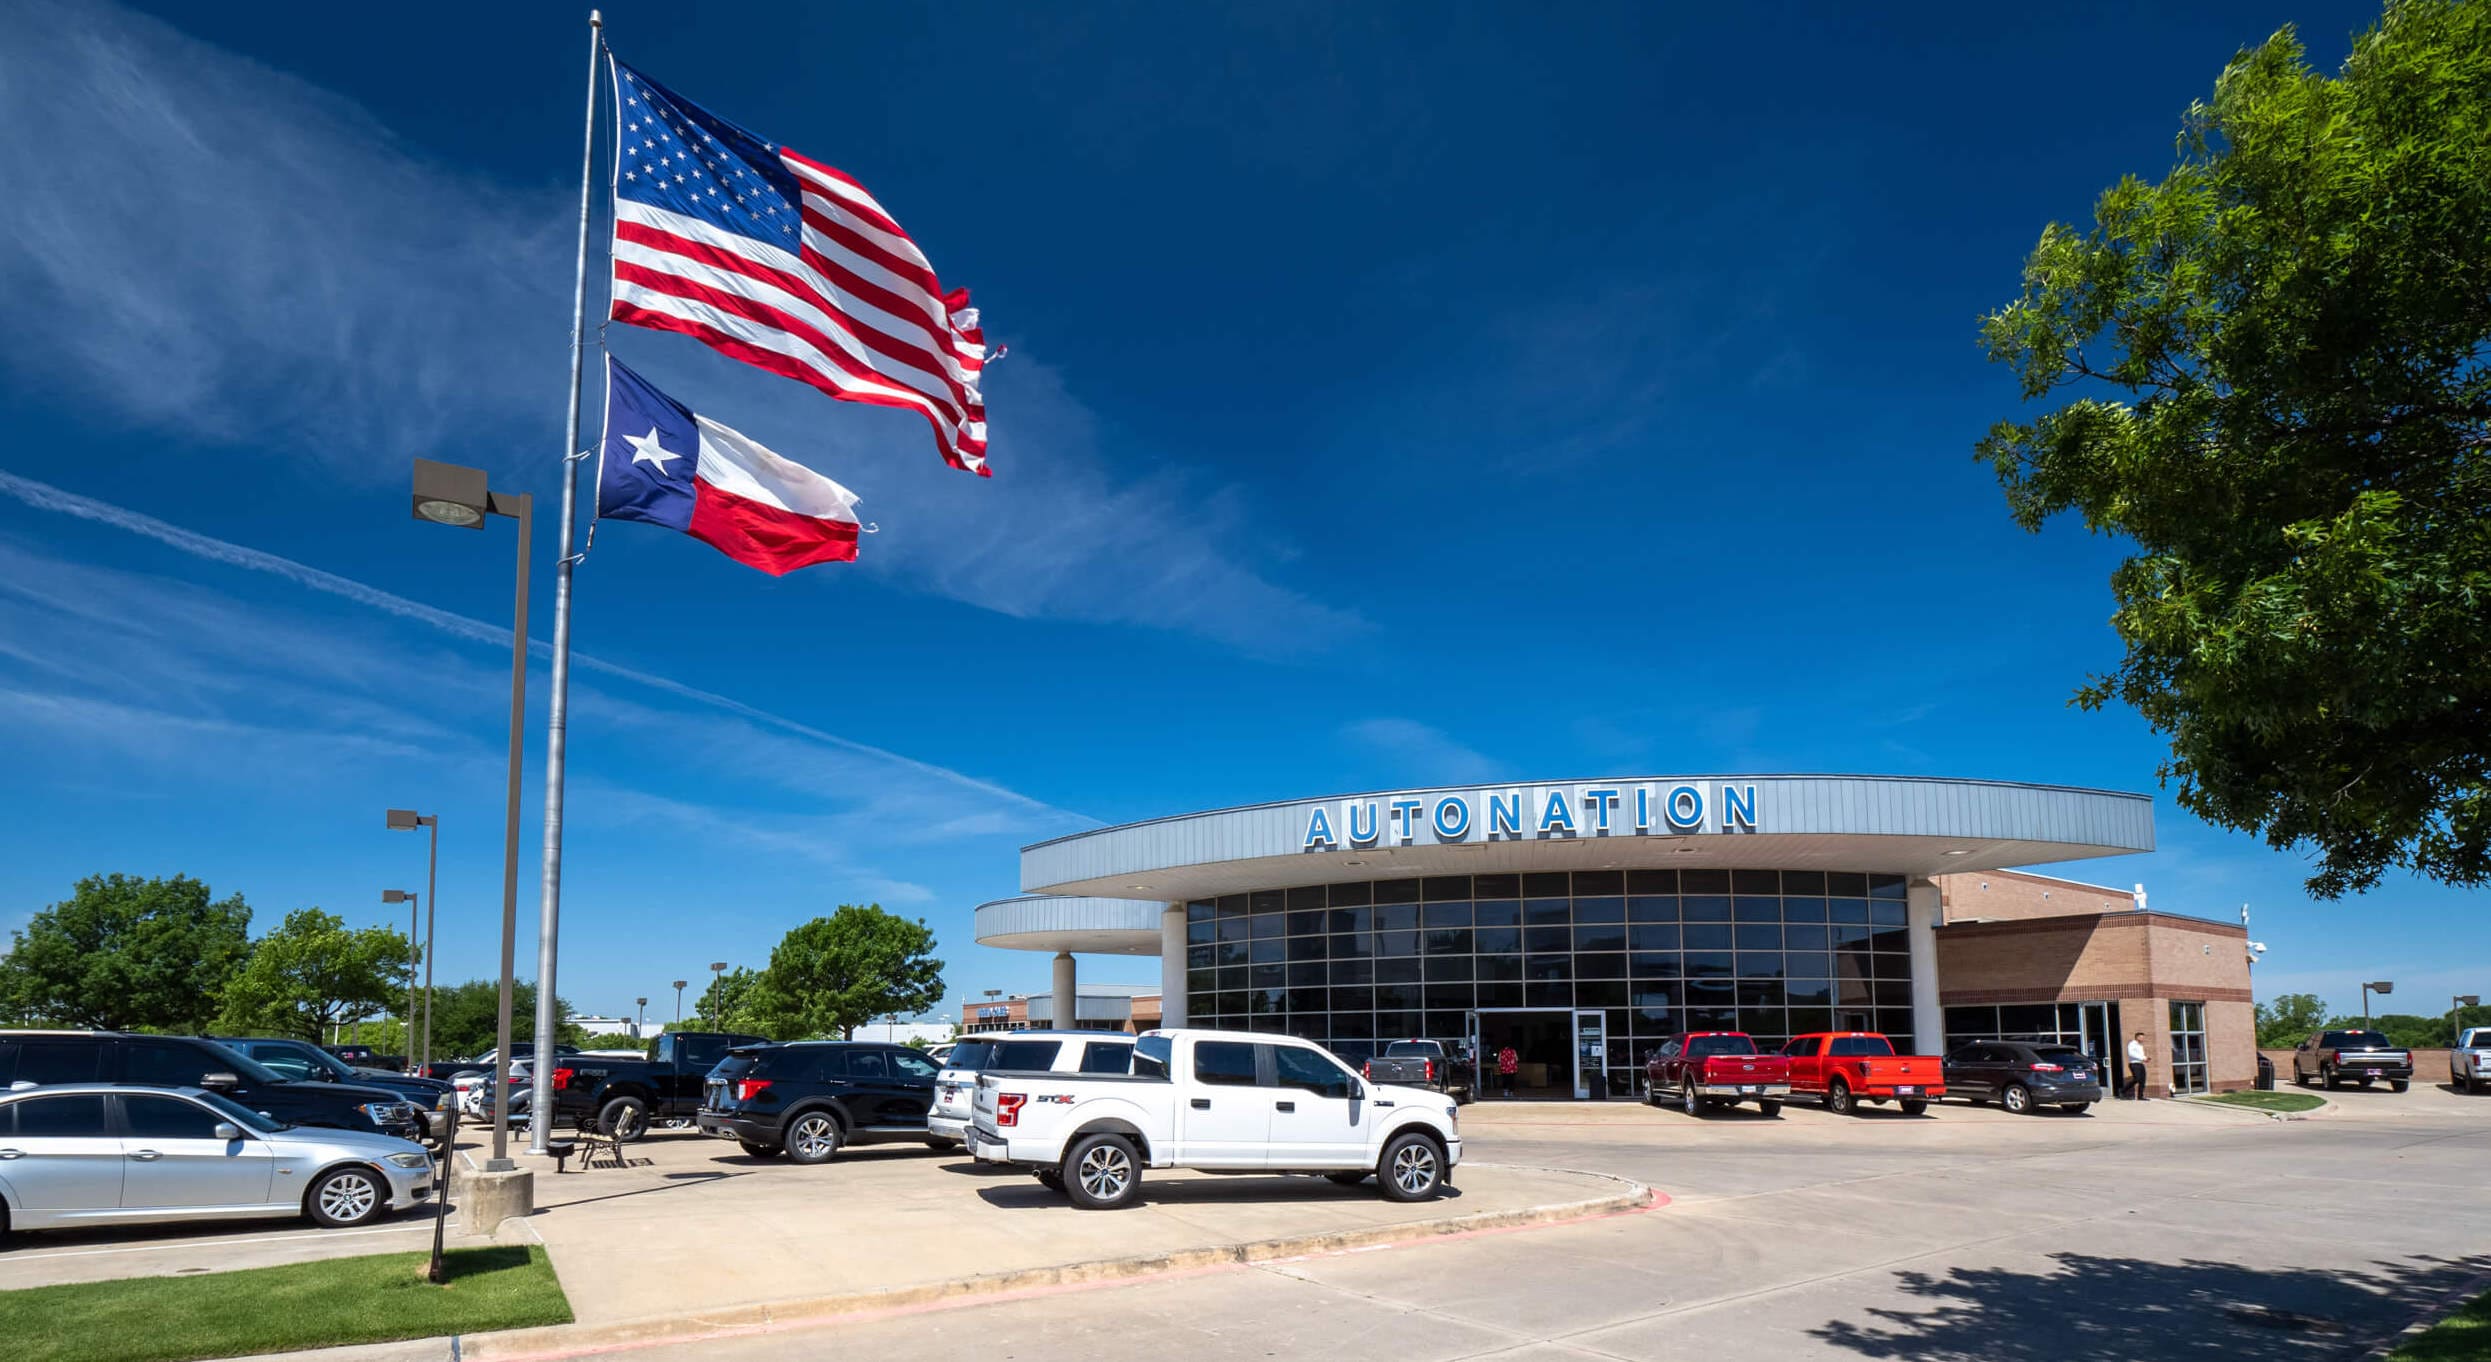 AutoNation Ford Frisco Exterior with American flag flying